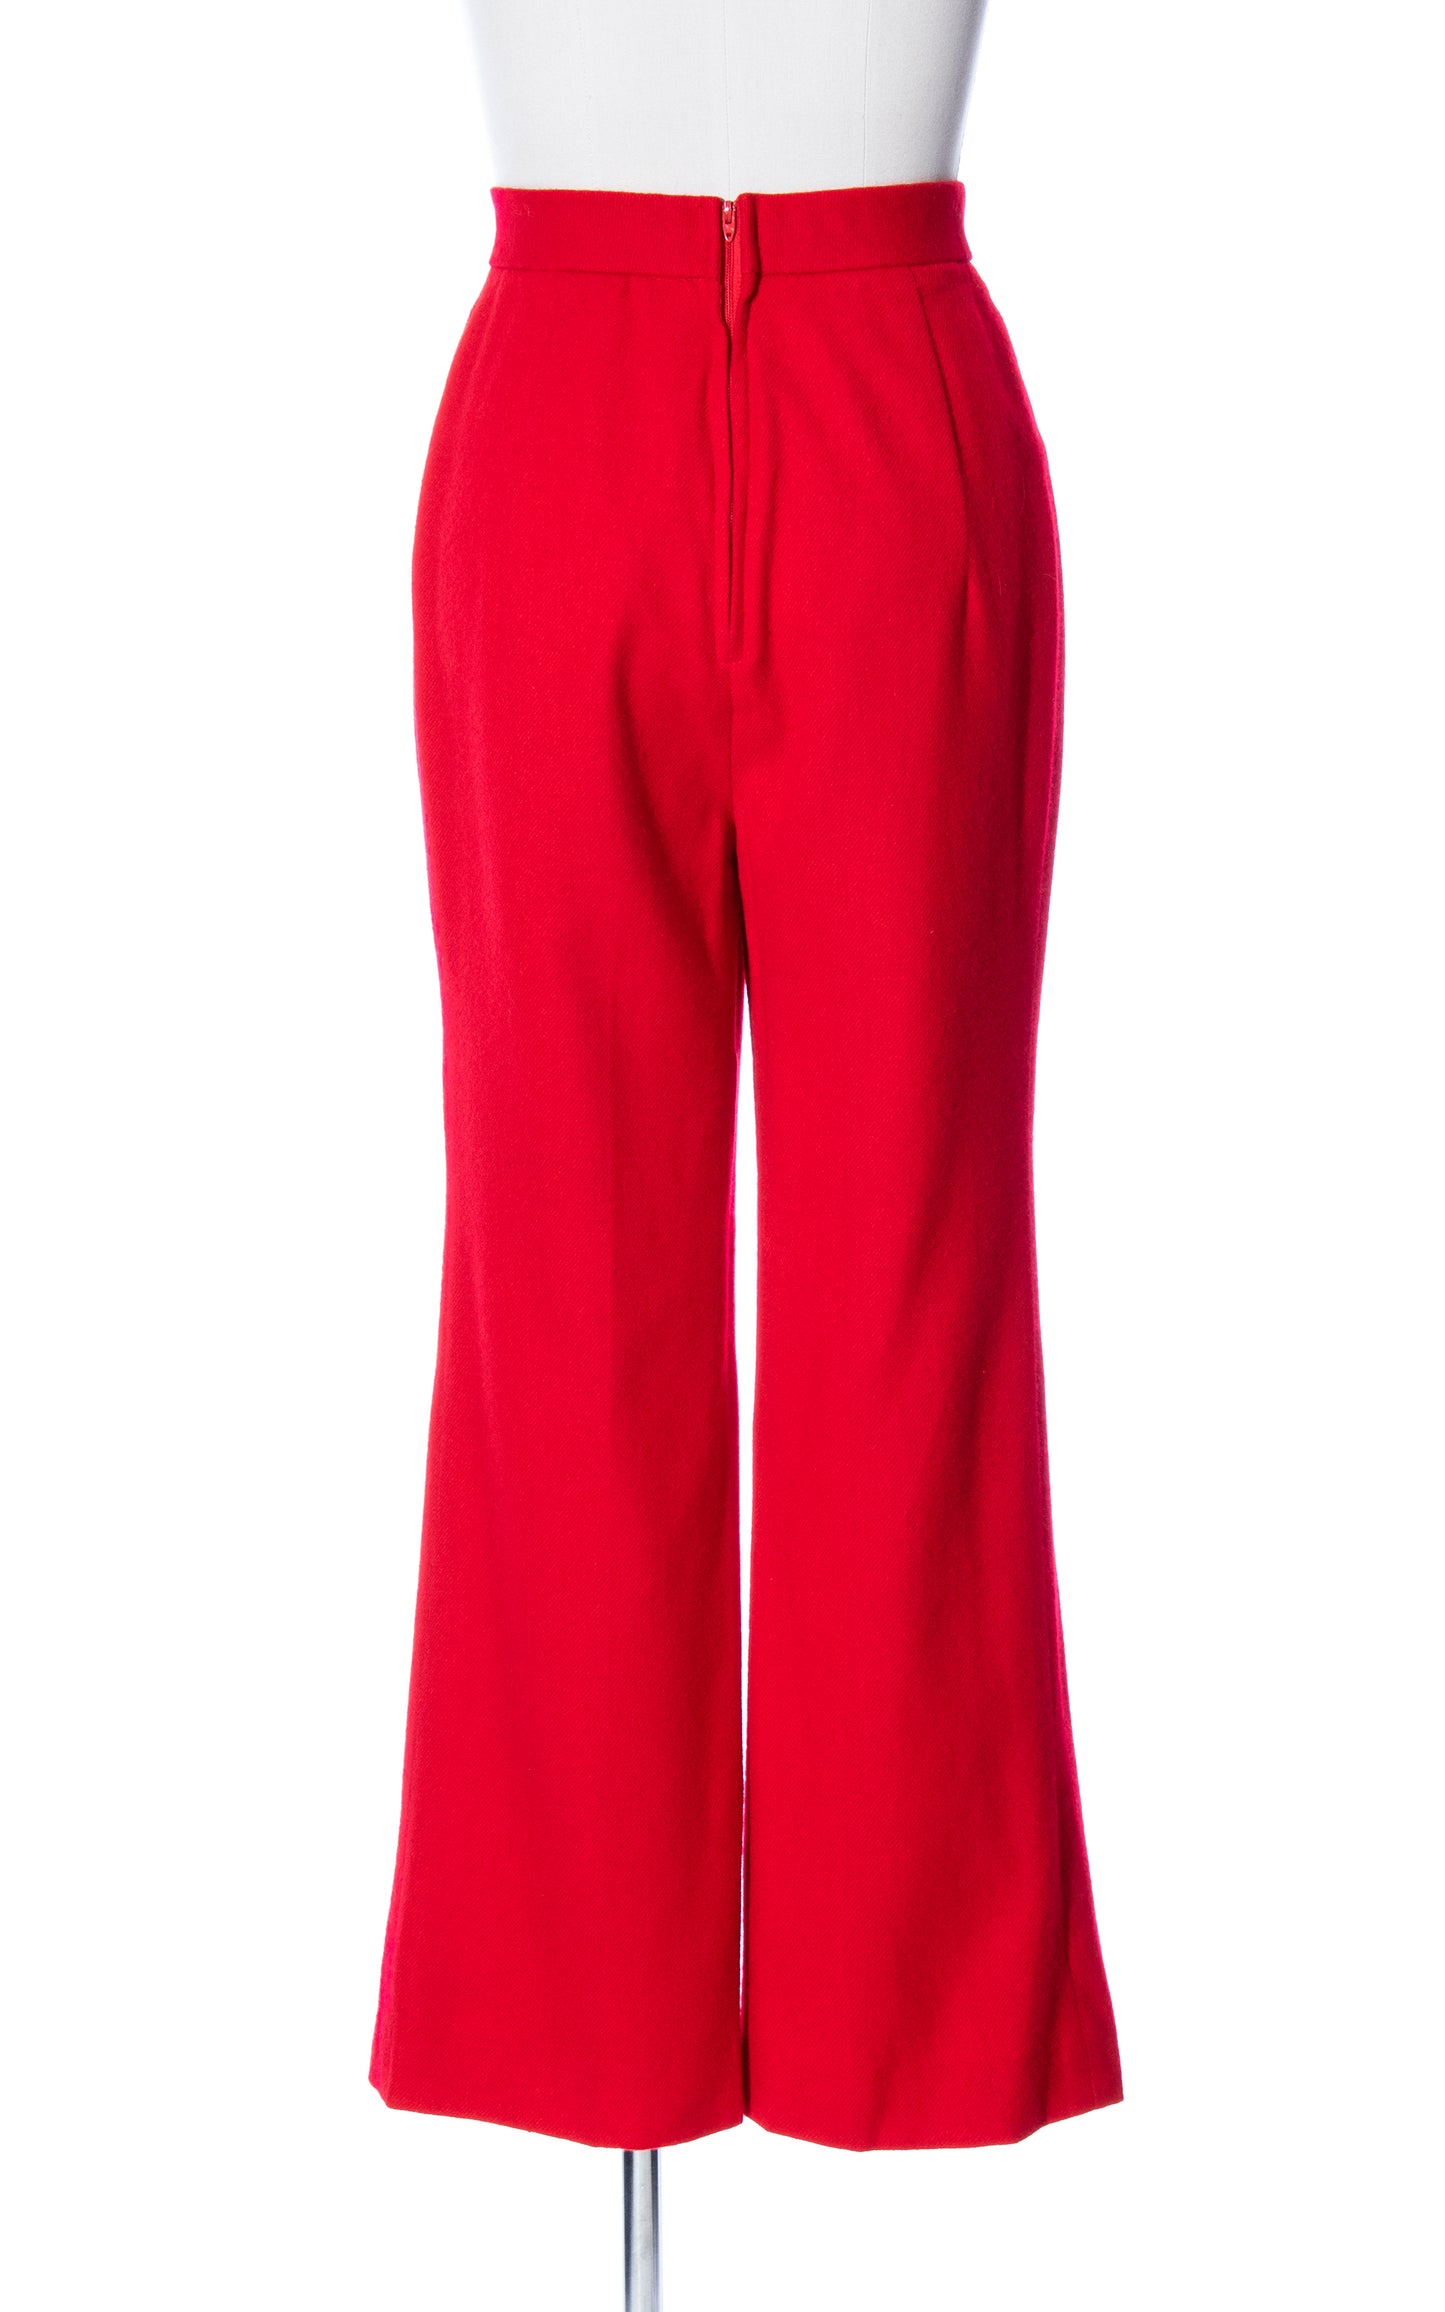 Vintage 70s 1970s Red Wool High Waisted Flared Bell Bottom Pants Birthday Life Vintage